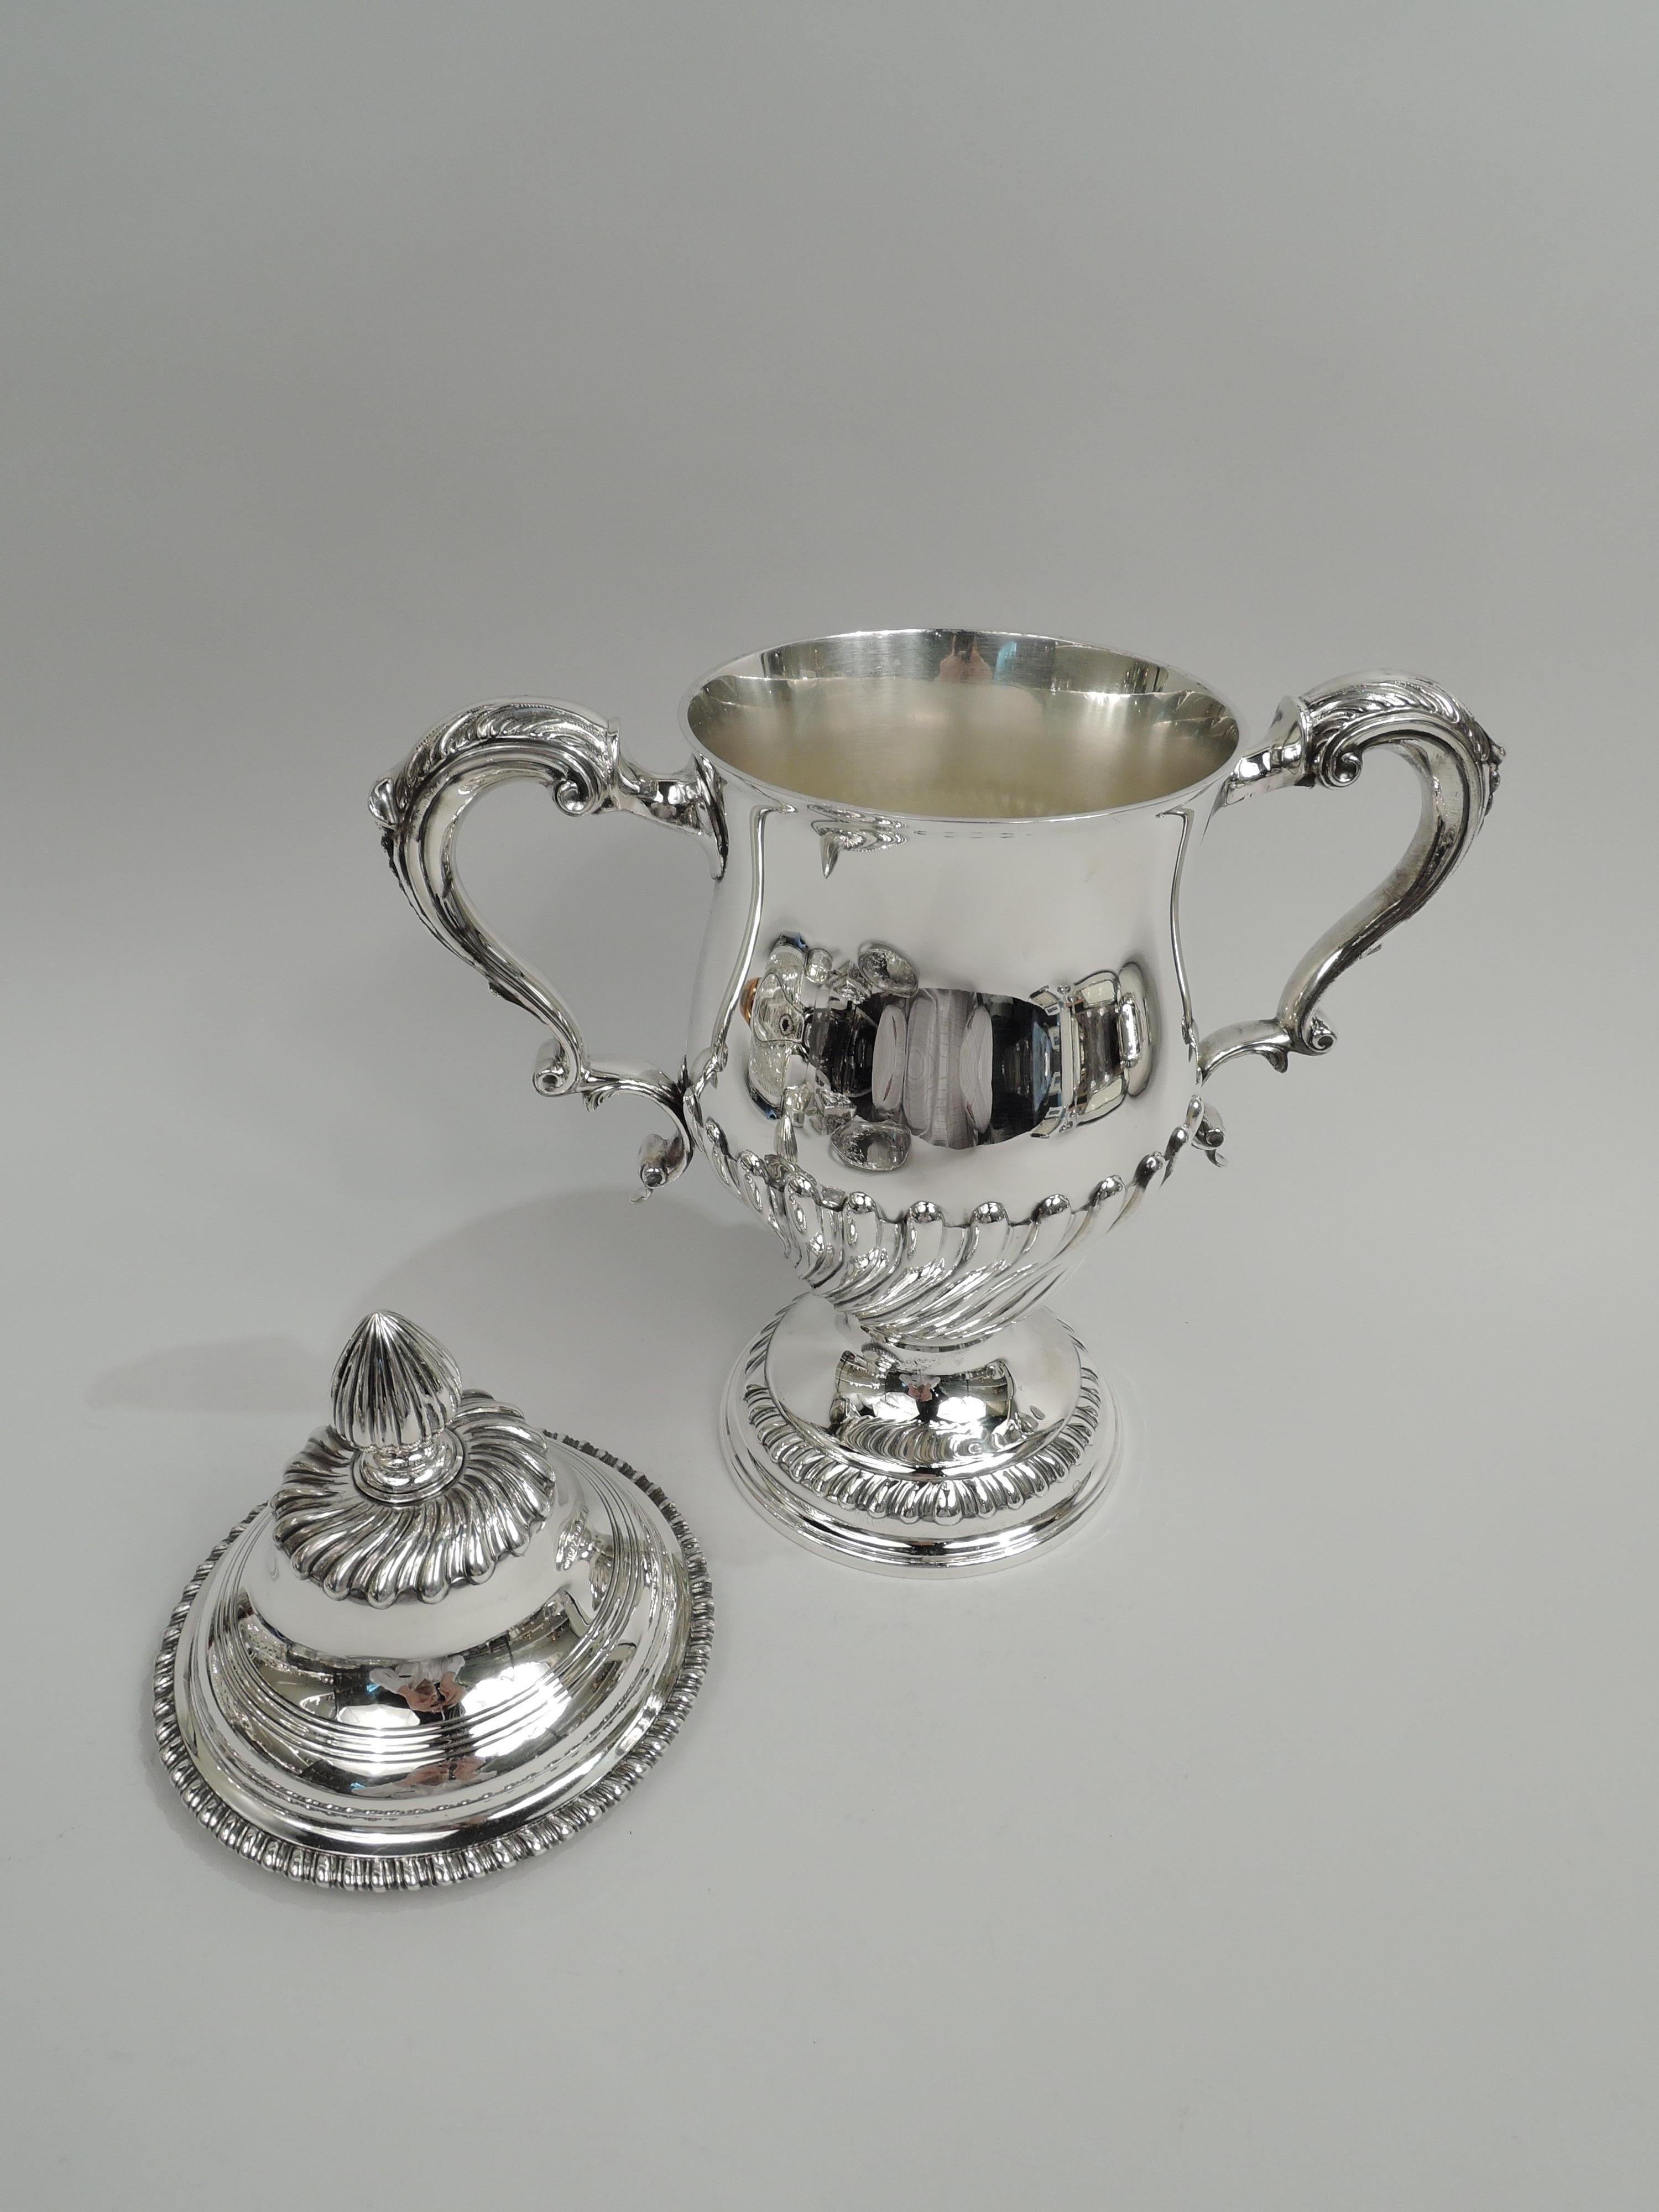 Neoclassical Revival Antique Tiffany Edwardian Classical Covered Urn Trophy Cup